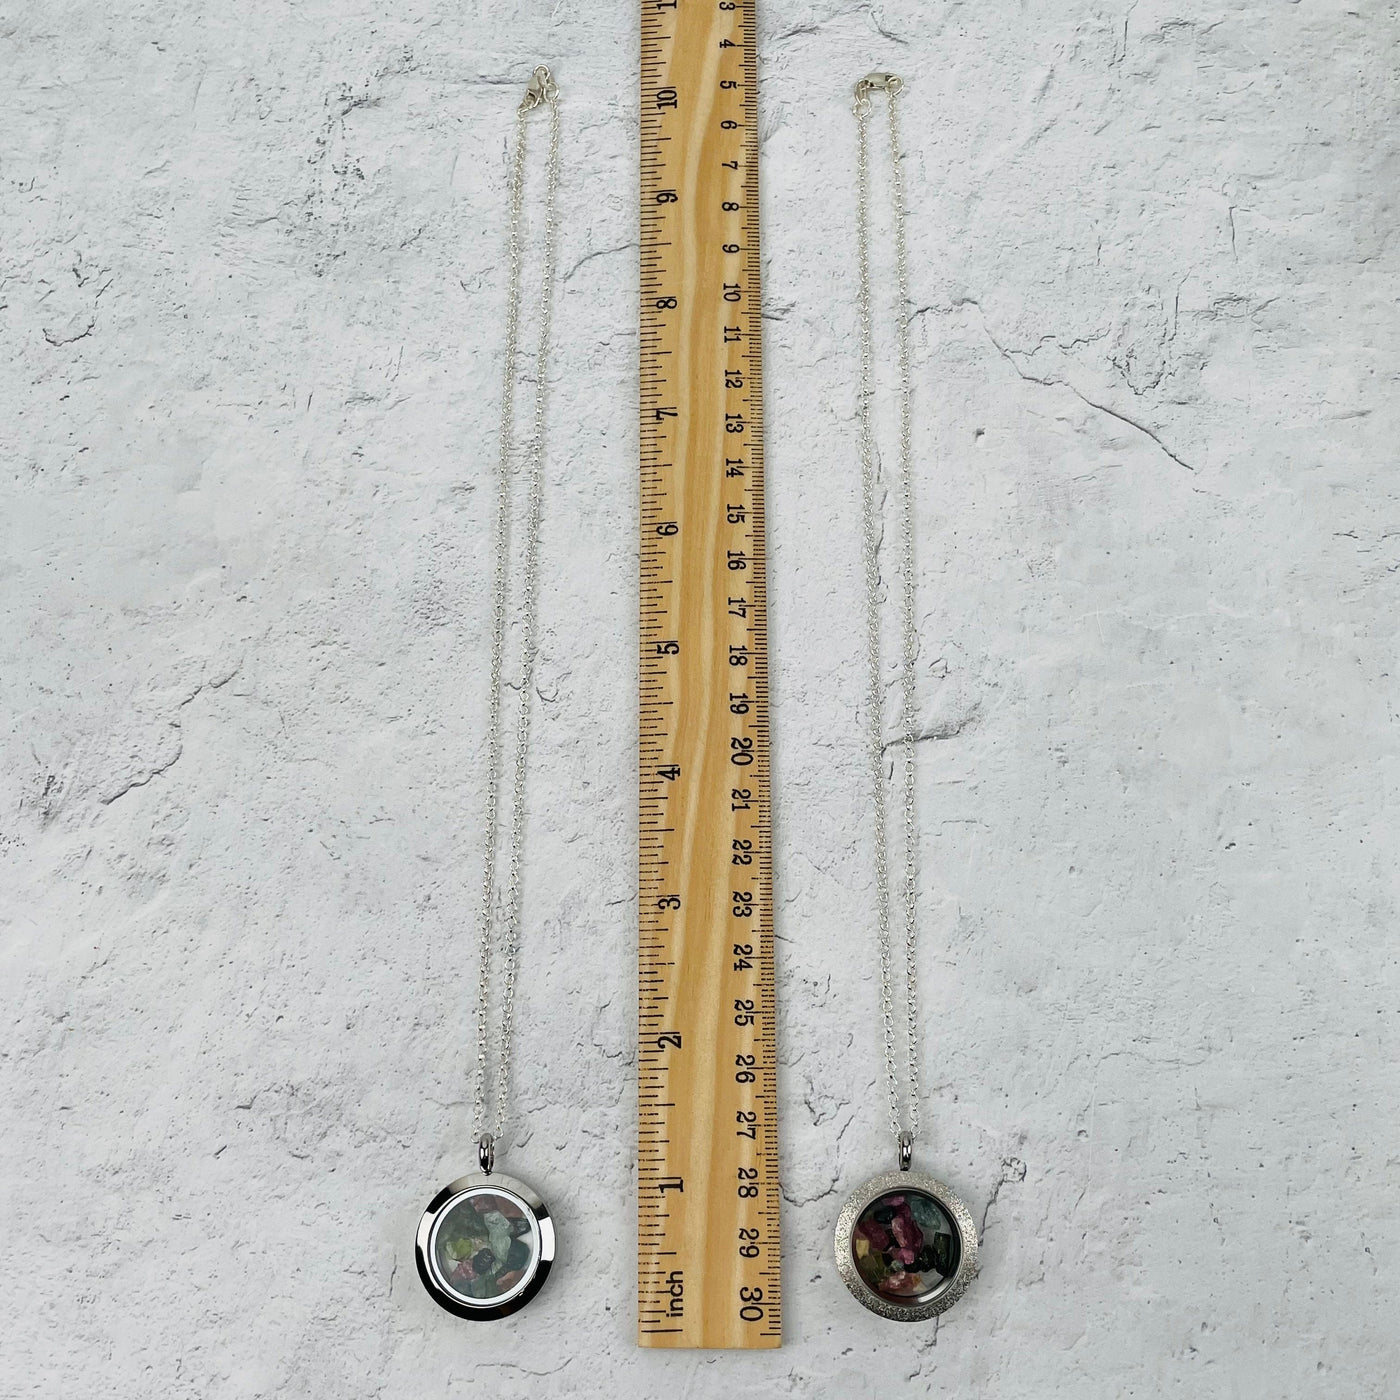 necklace and pendant next to a ruler for size reference. comes on an 18" silver chain 